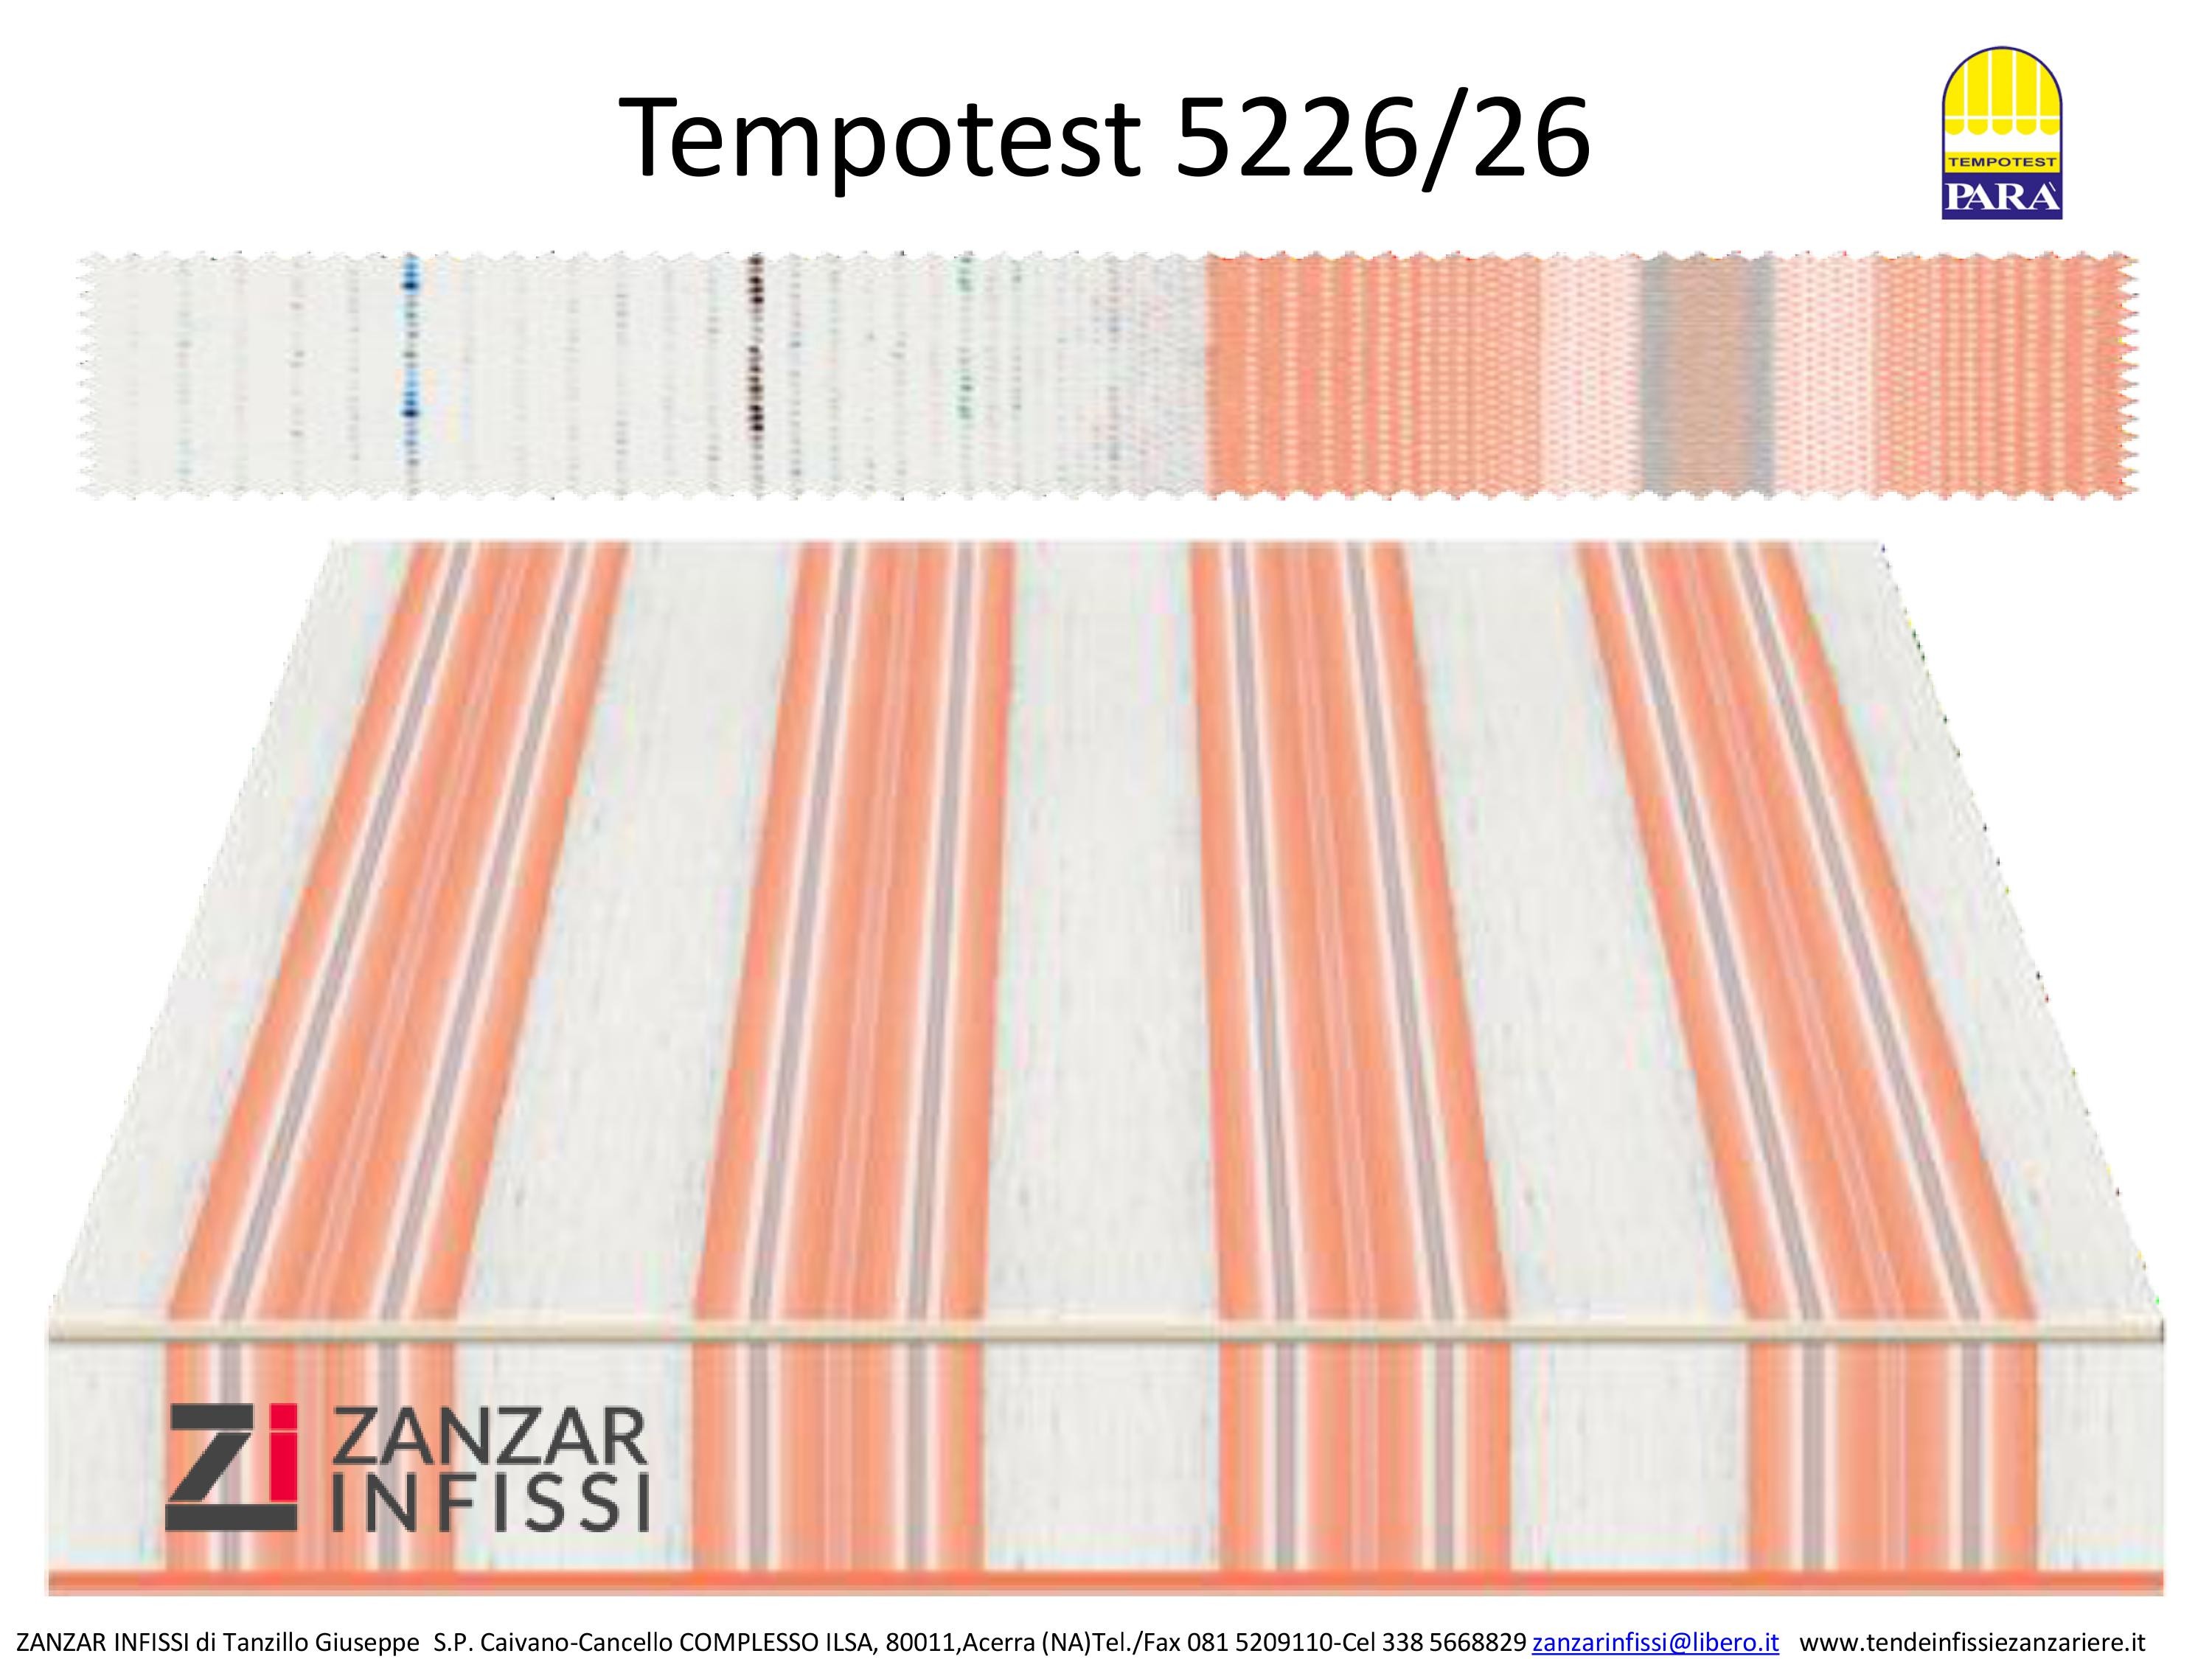 Tempotest 5226/26